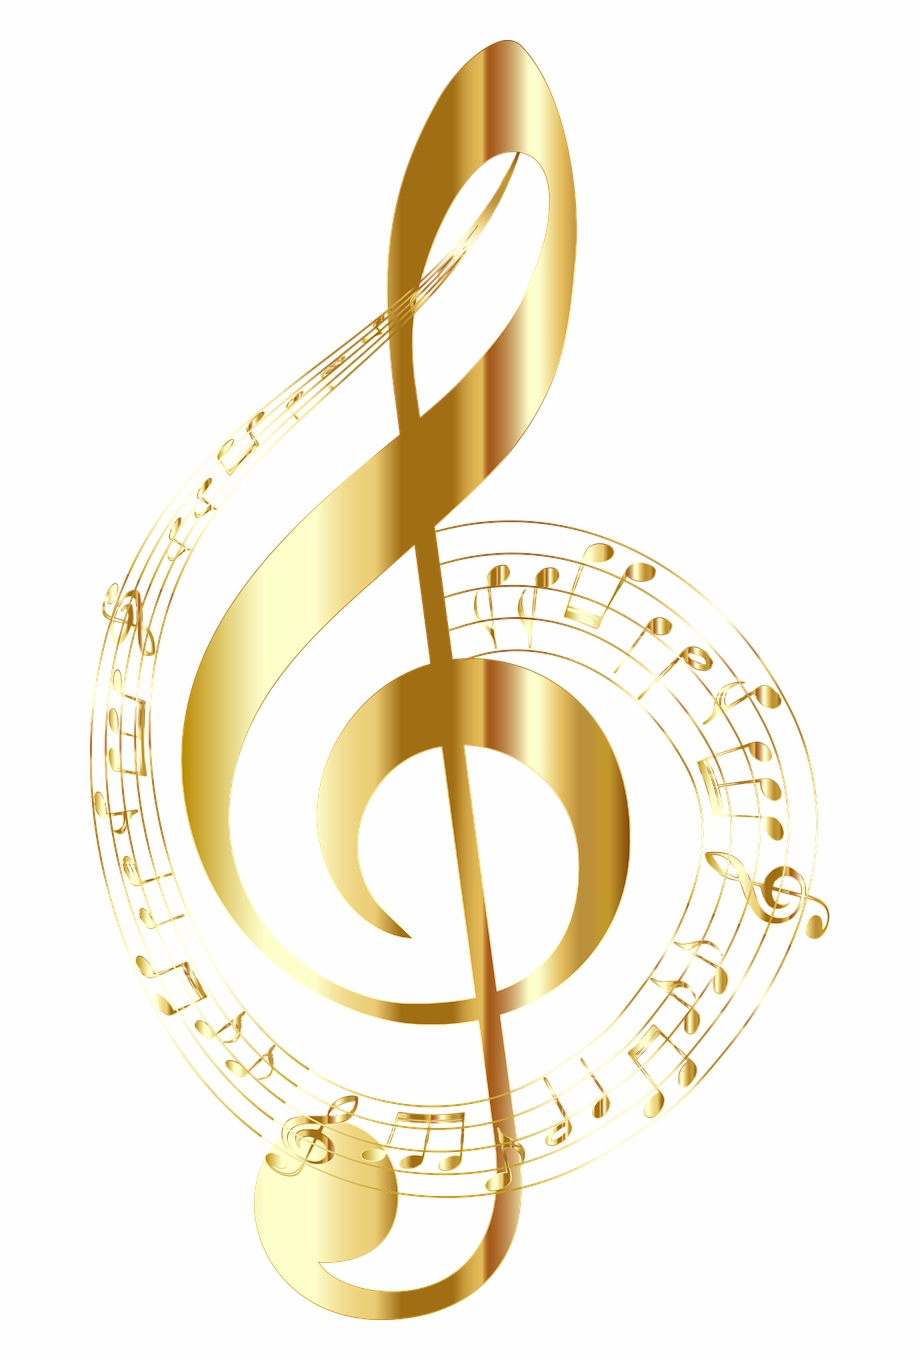 gold music notes transparent background
